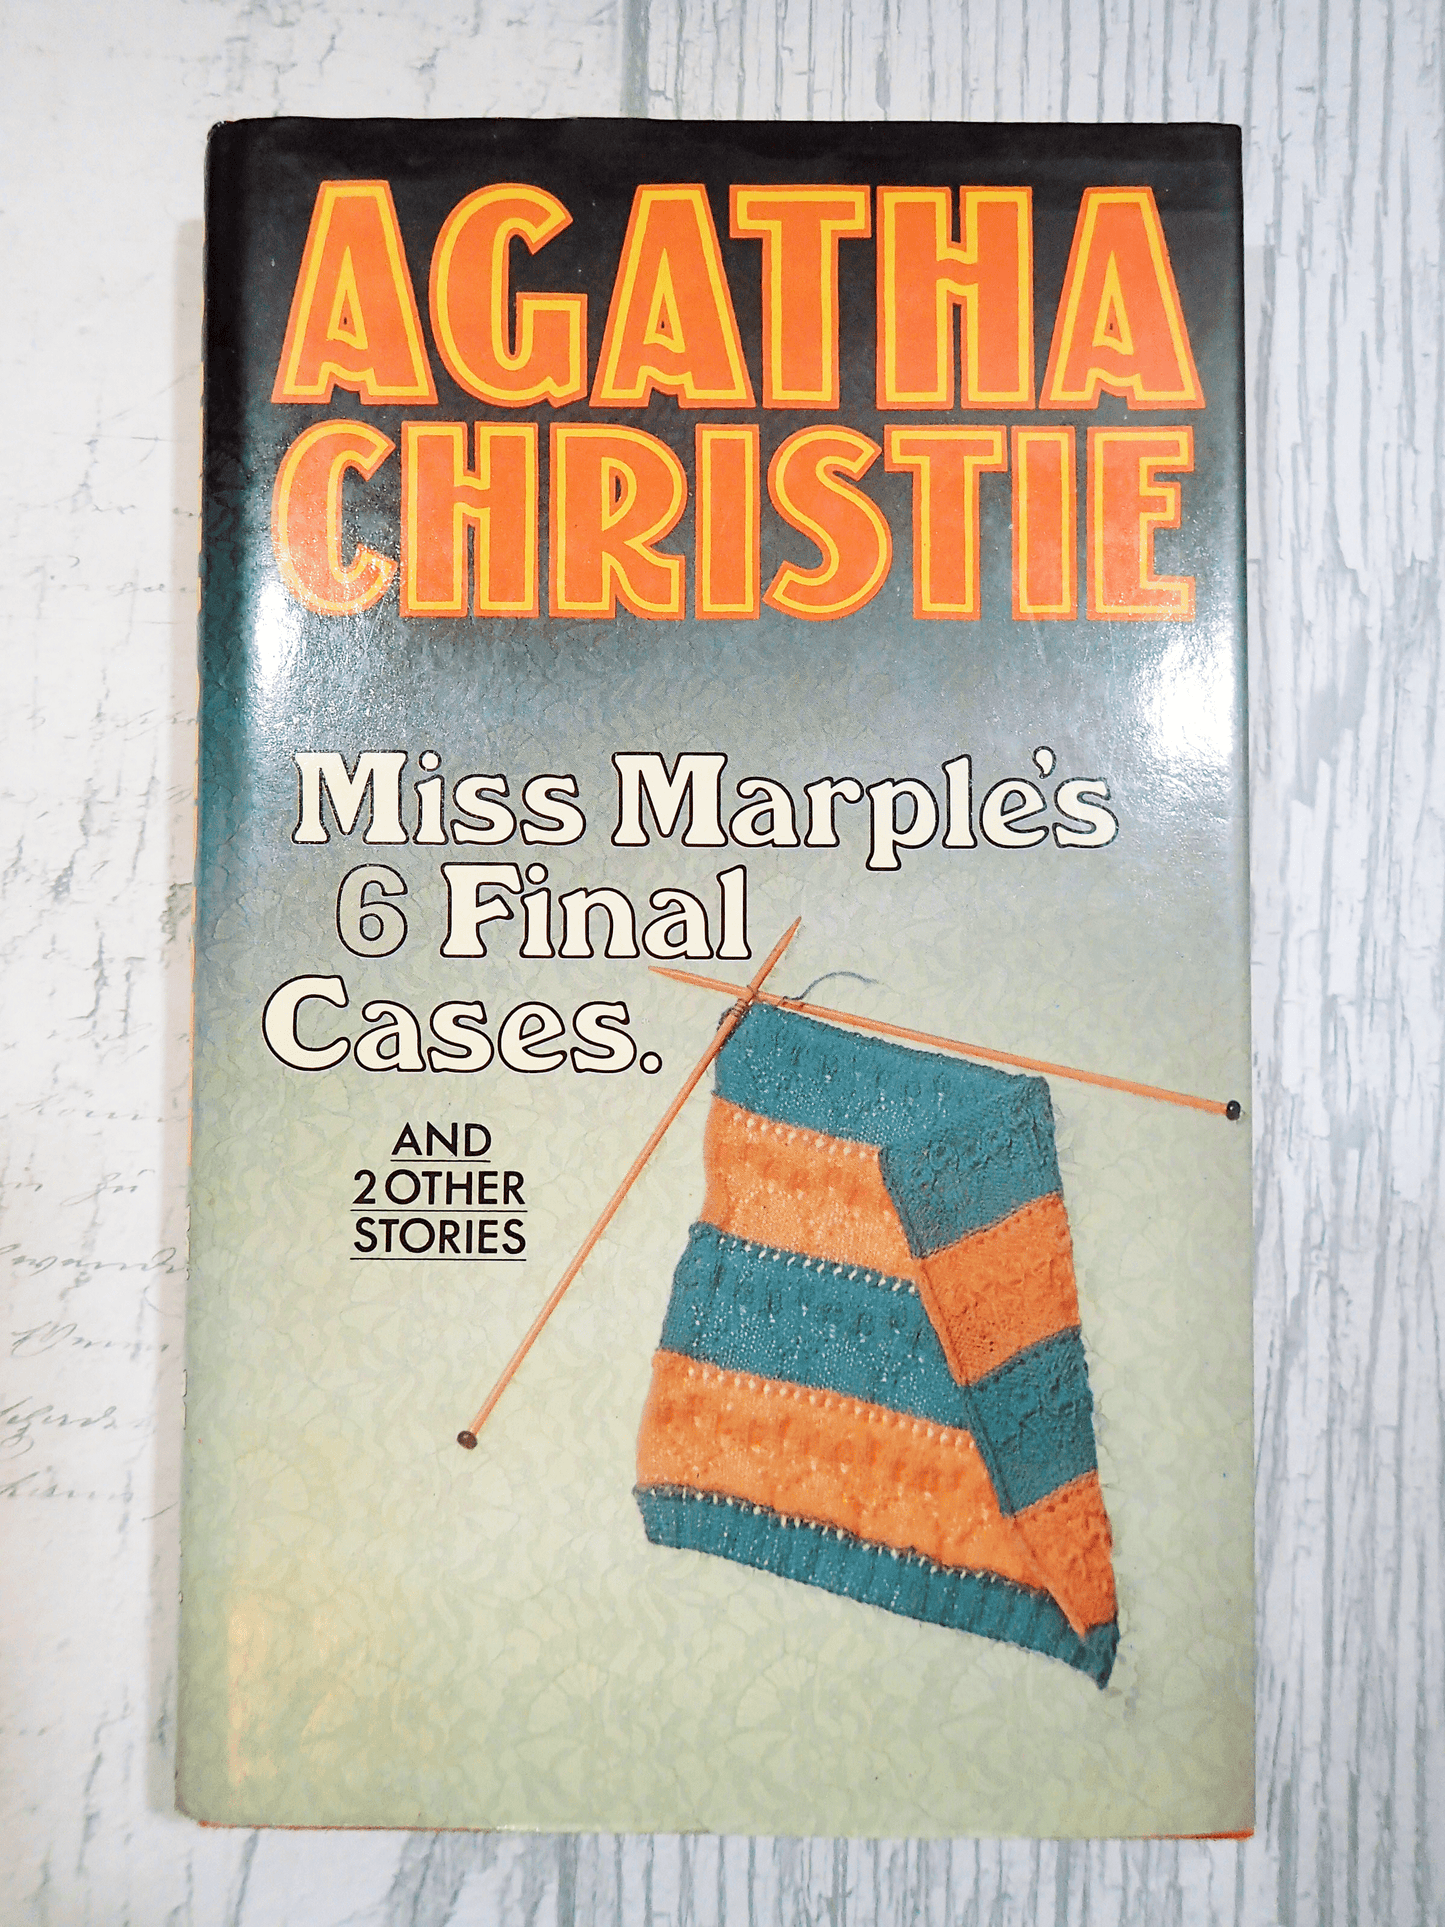 Front cover of Agatha Christie Miss Marples Final Cases Collins Crime Club First Edition Book 1979 showing some stripey knitting and titles in orange against a light background.